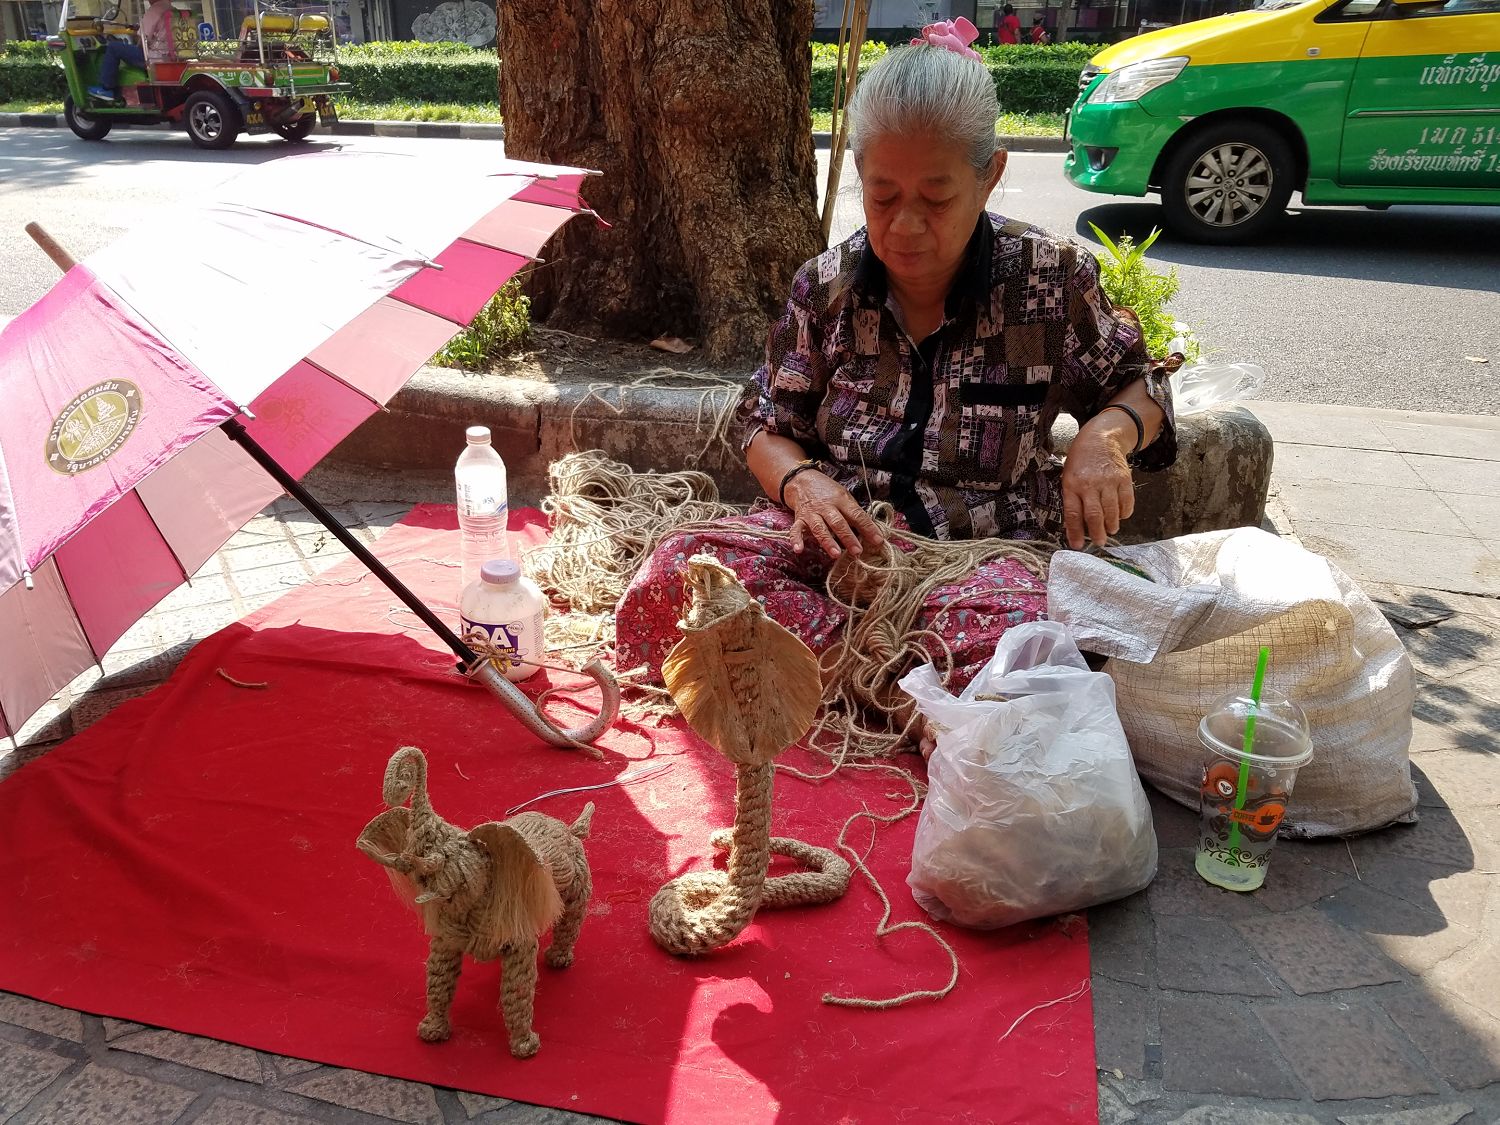 This lady made sculptures from string... what a creative idea!